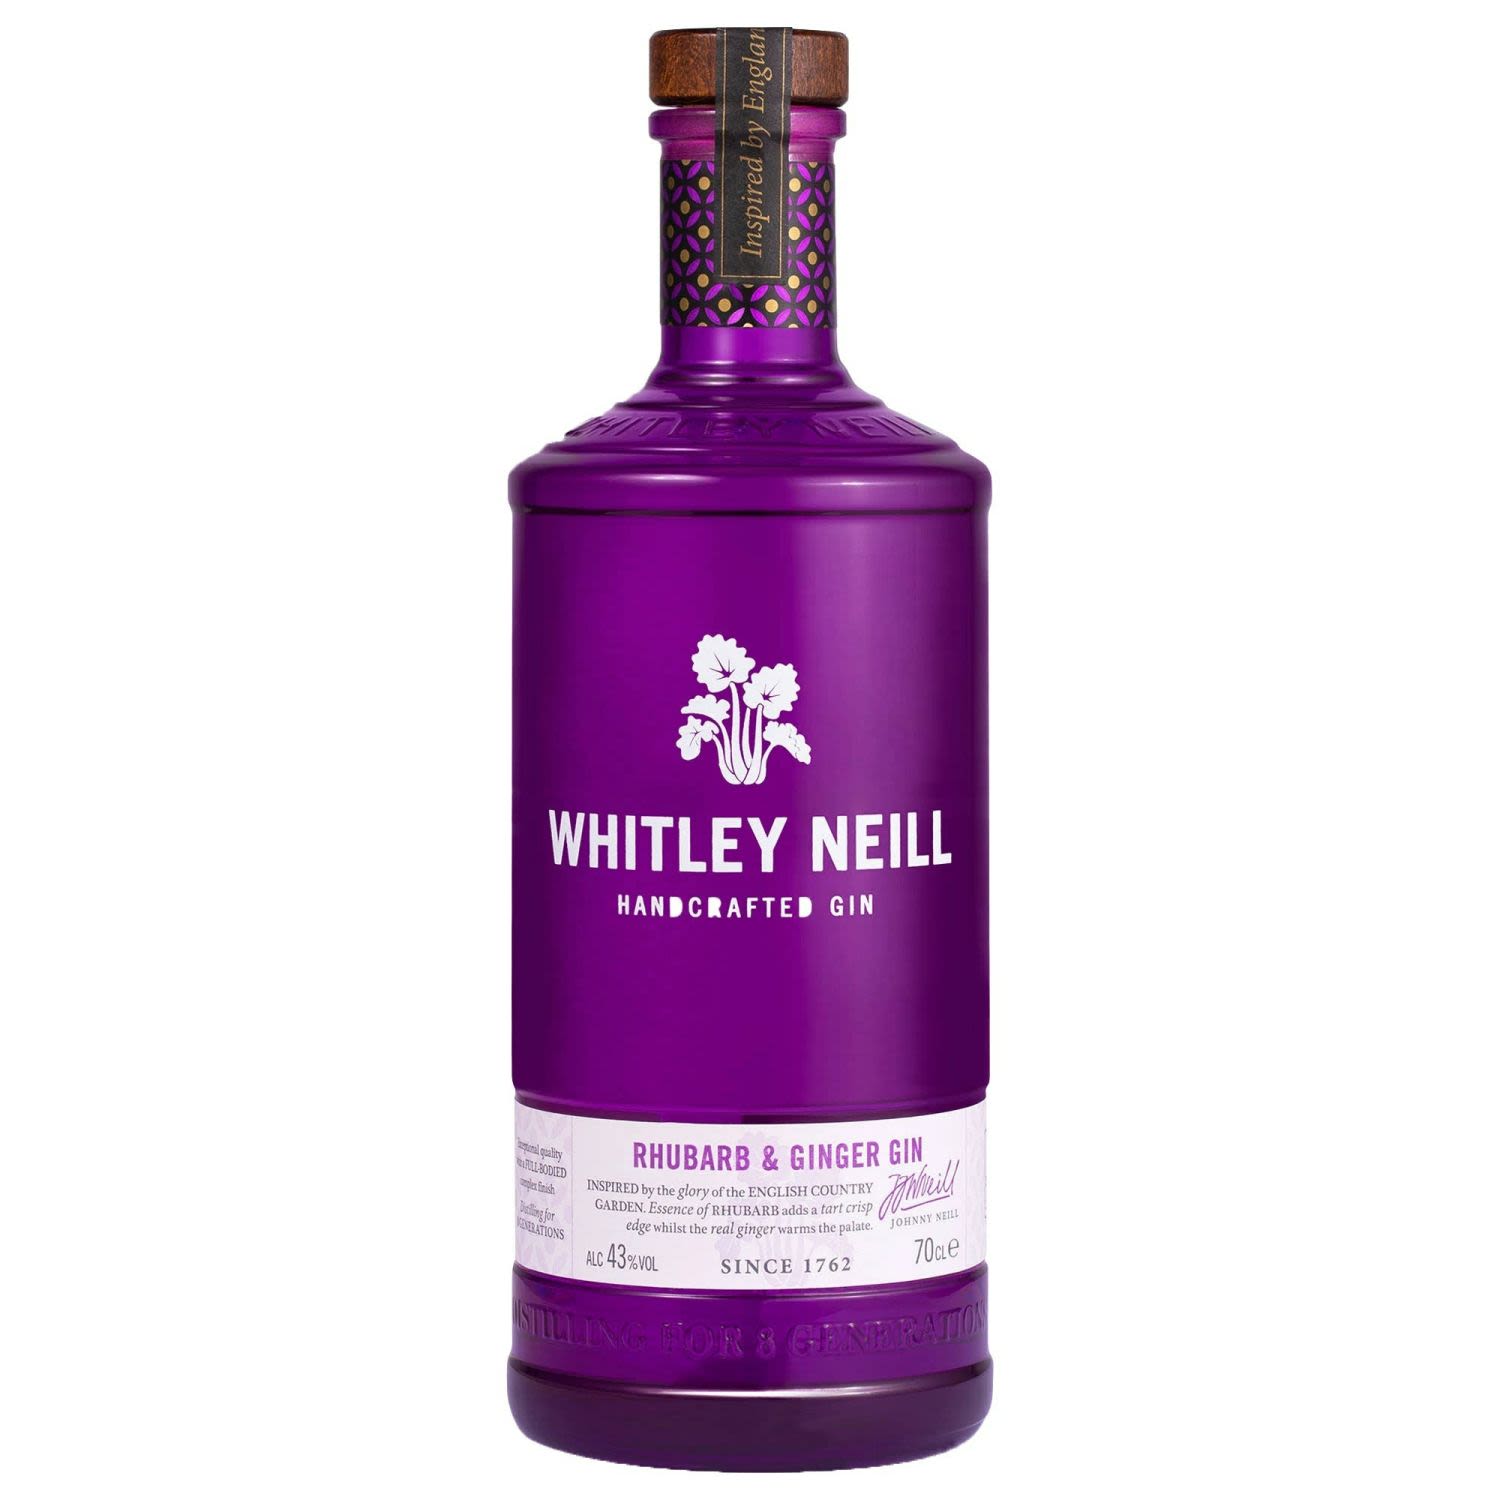 Whitley Neil Rhubarb & Ginger Gin is inspired by the glory of English country gardens, the essence of rhubarb adds a tart crisp edge to the smooth English Gin base, whilst the ginger extract warms the palate for a full bodied finish.<br /> <br />Alcohol Volume: 43.00%<br /><br />Pack Format: Bottle<br /><br />Standard Drinks: 23.8<br /><br />Pack Type: Bottle<br /><br />Country of Origin: United Kingdom<br />